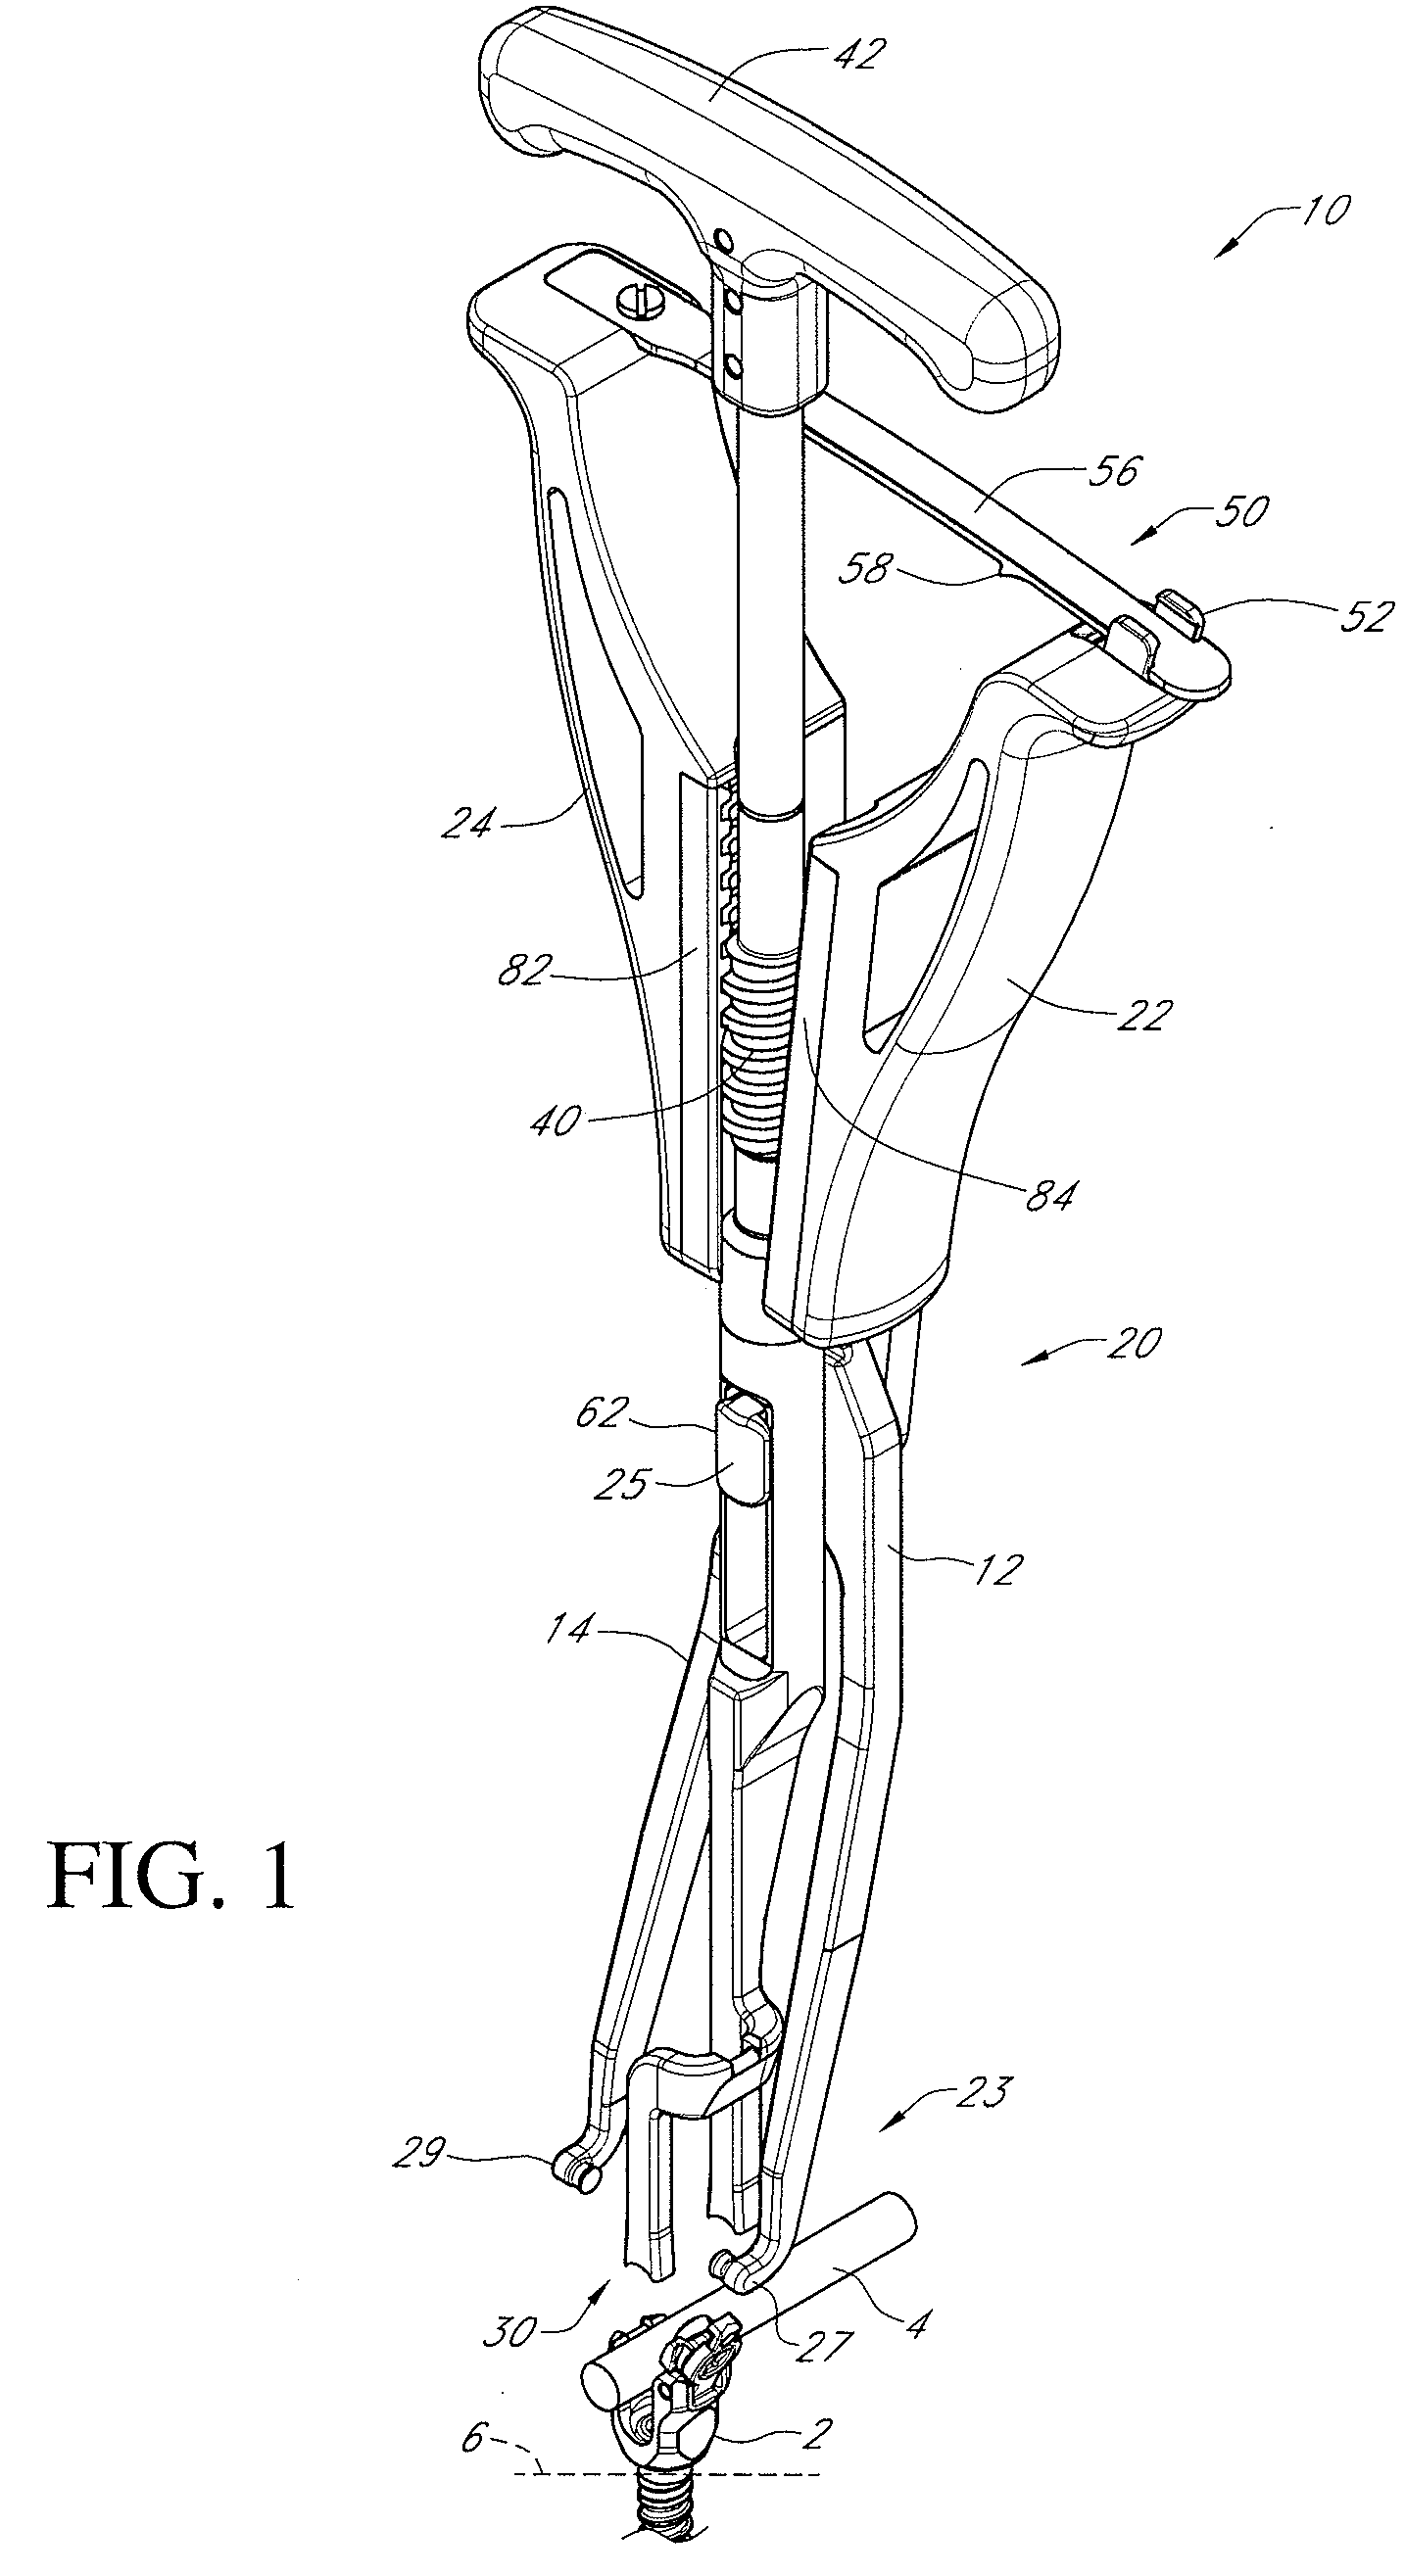 Rod reducer instrument for spinal surgery